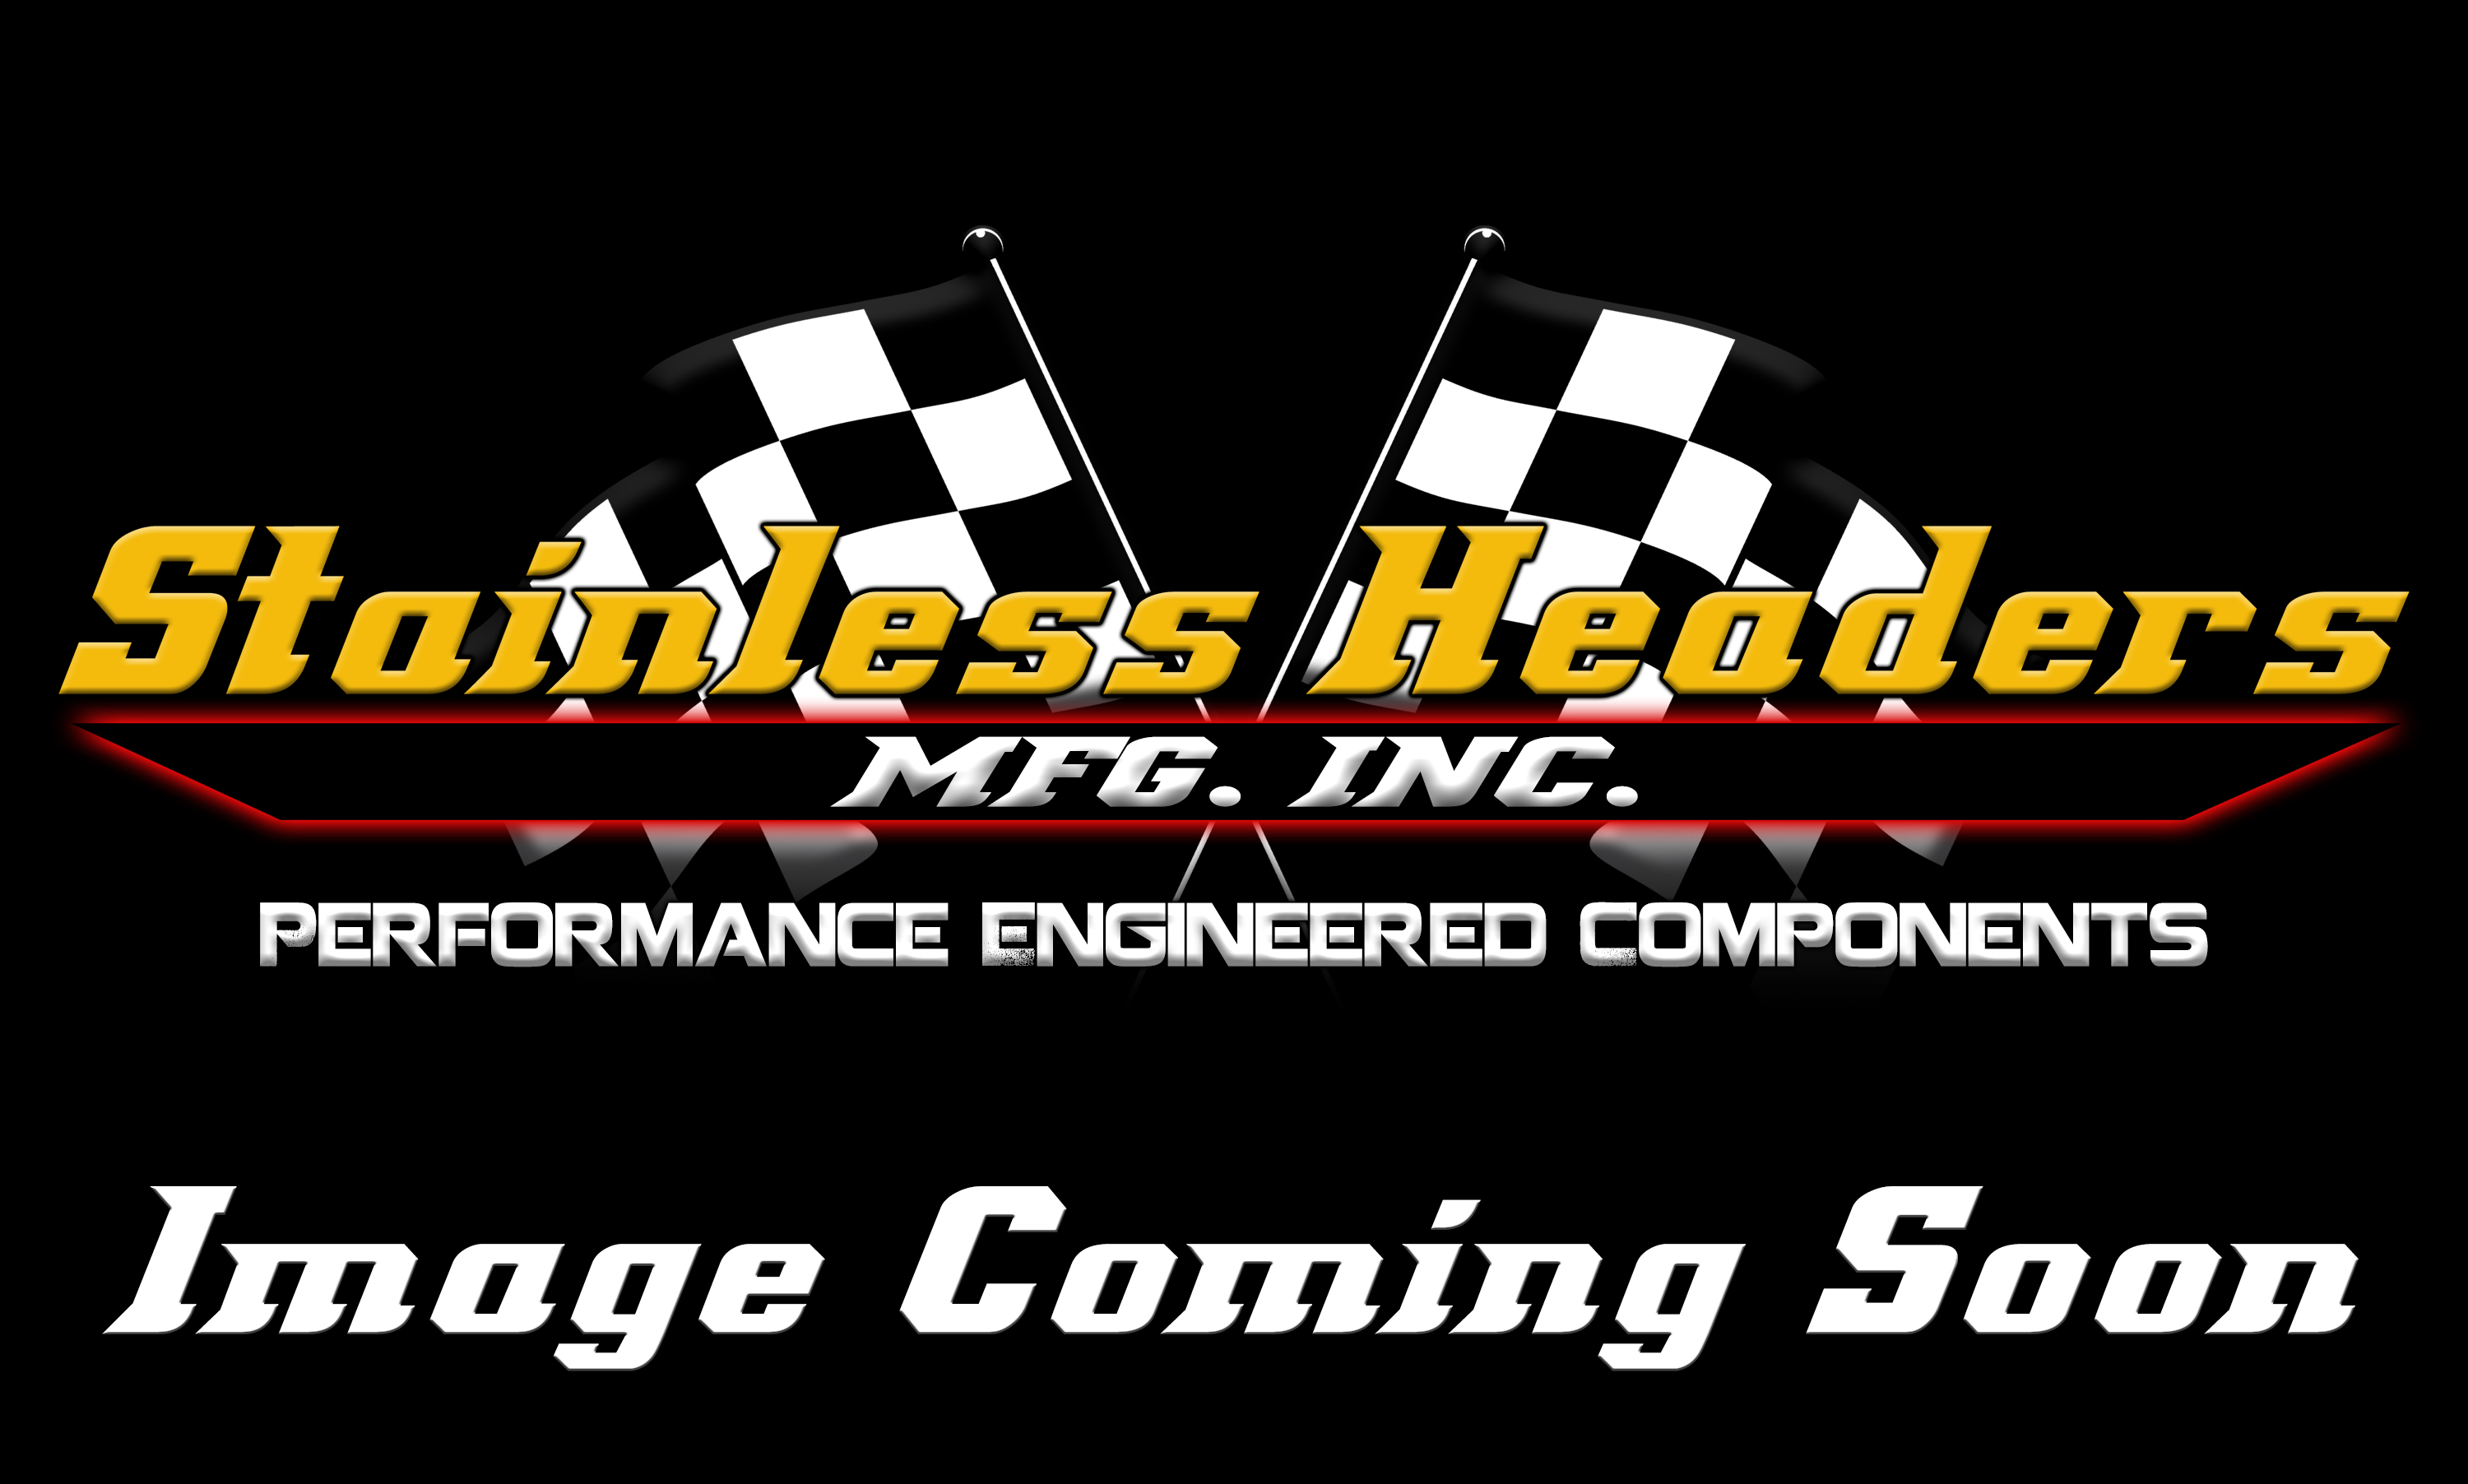 Stainless Headers - 2 1/8" Primary 4 into 1 Performance Merge Collector-16ga Mild Steel